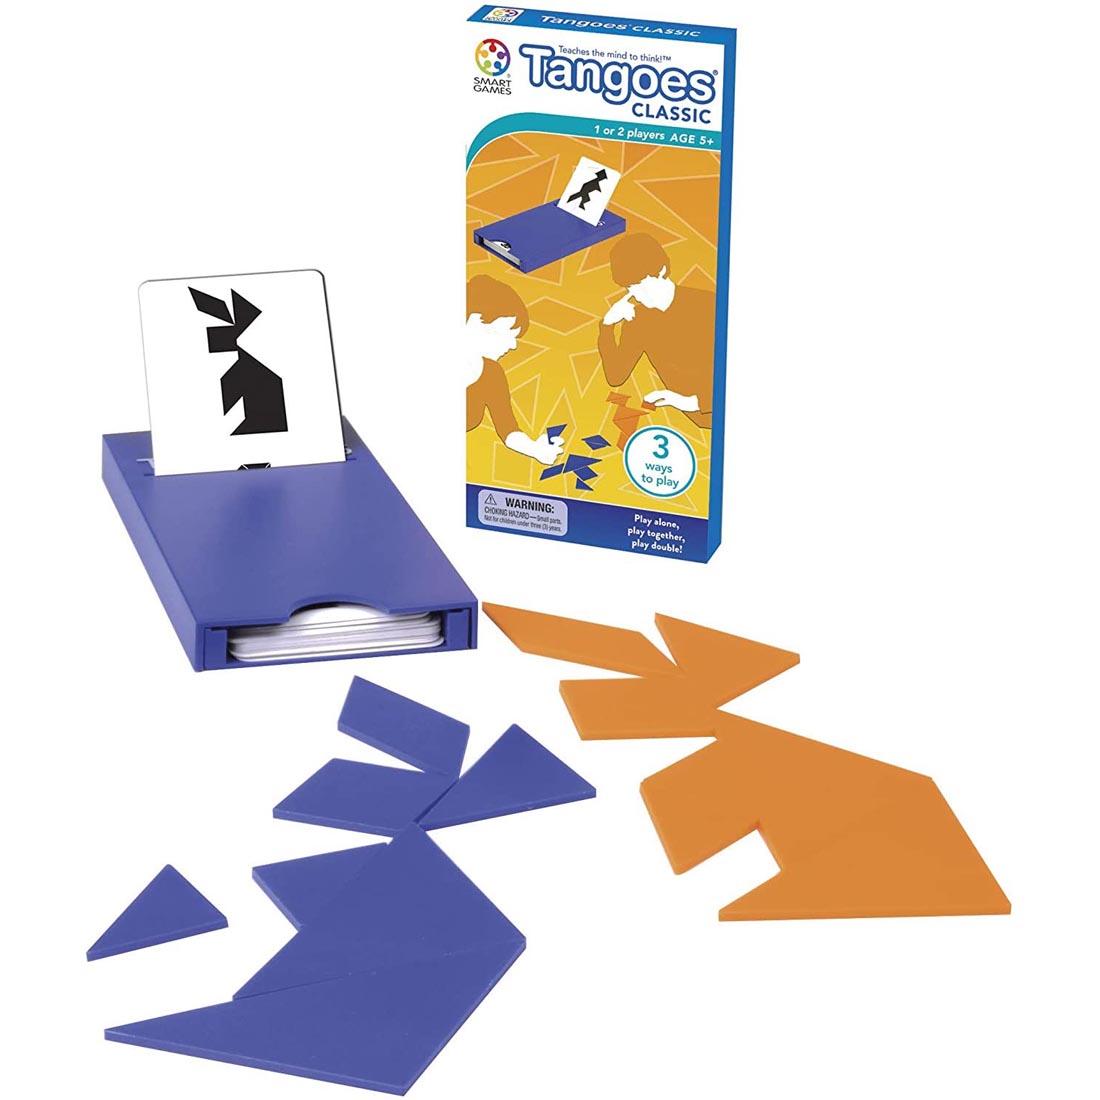 Tangoes Classic by Smart Games